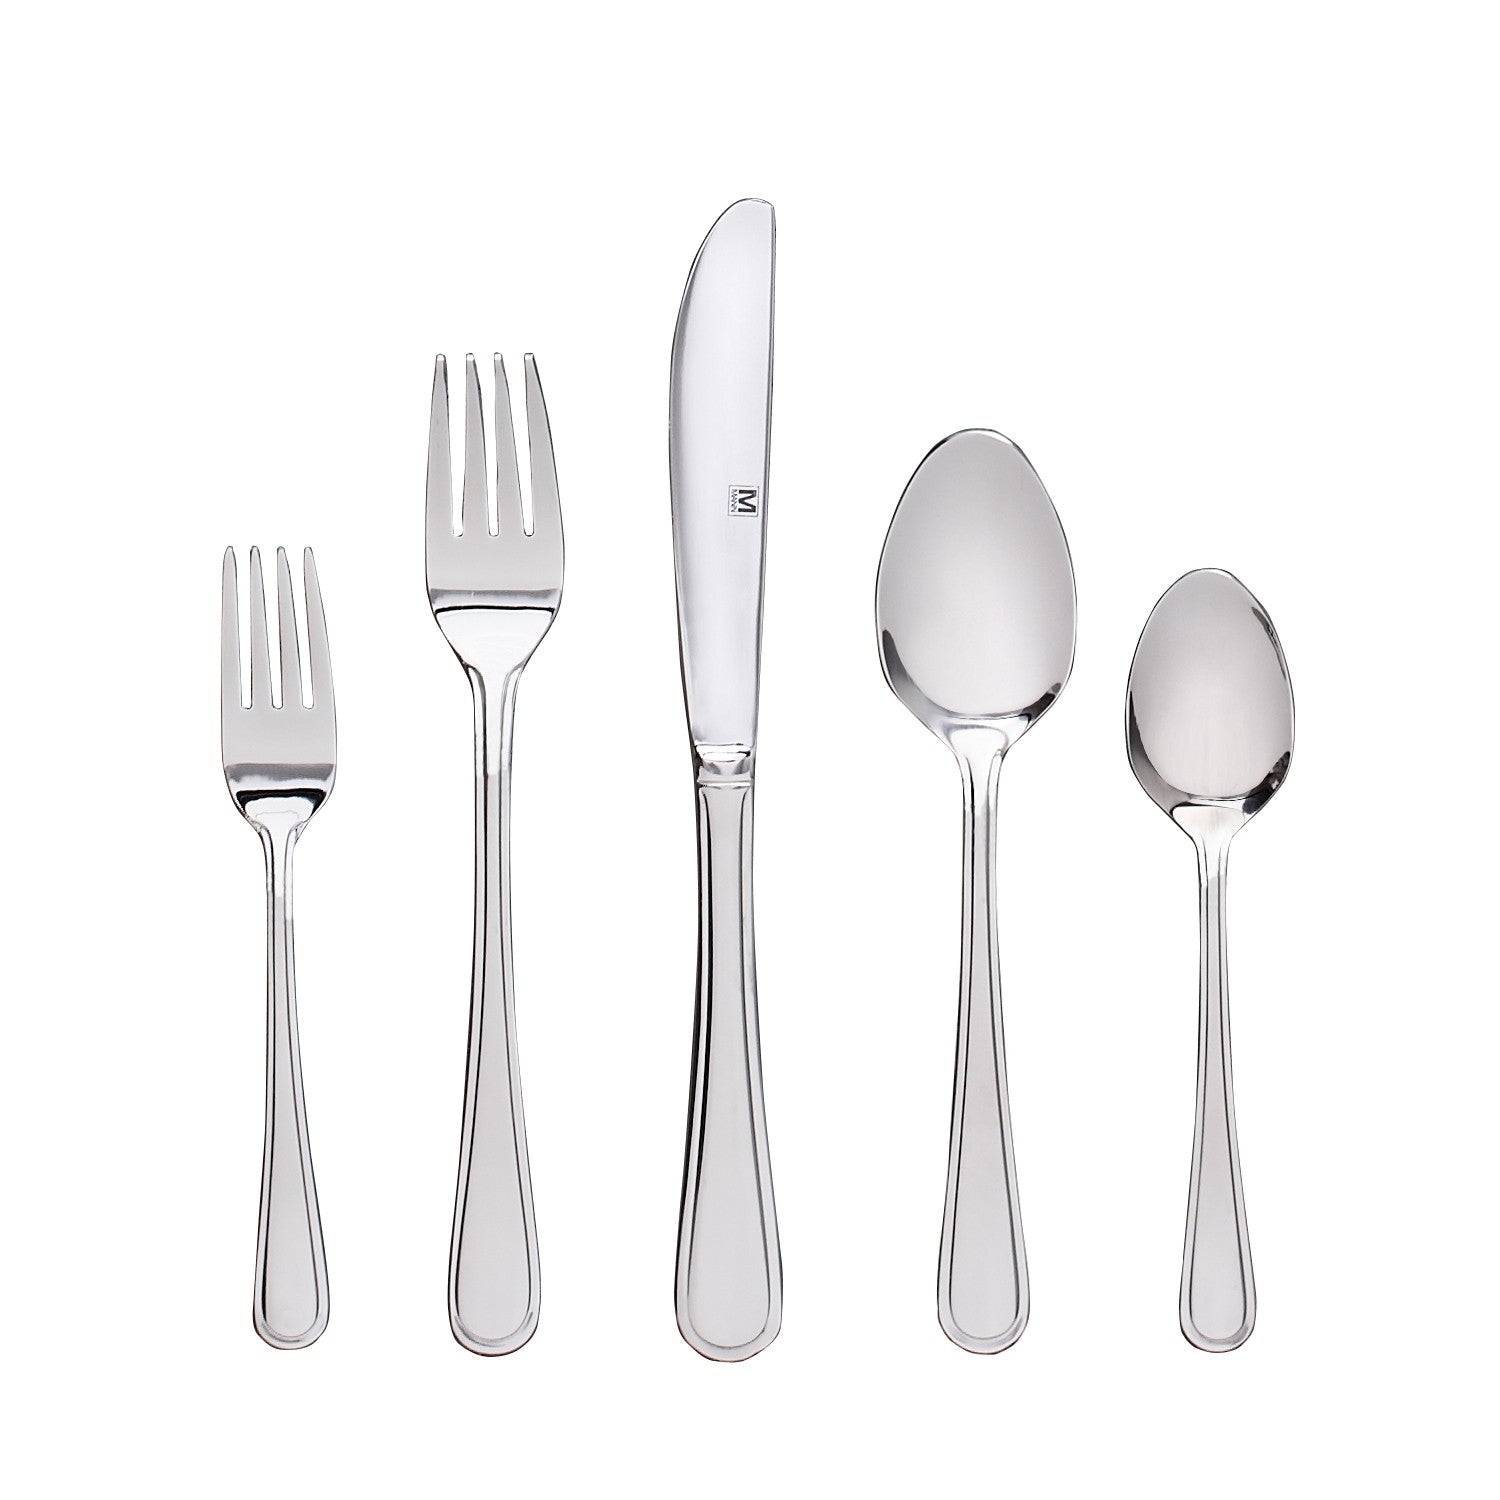 title:Safdie & Co. Flatware Stainless Steel 40PC Set Kelby;color:Silver